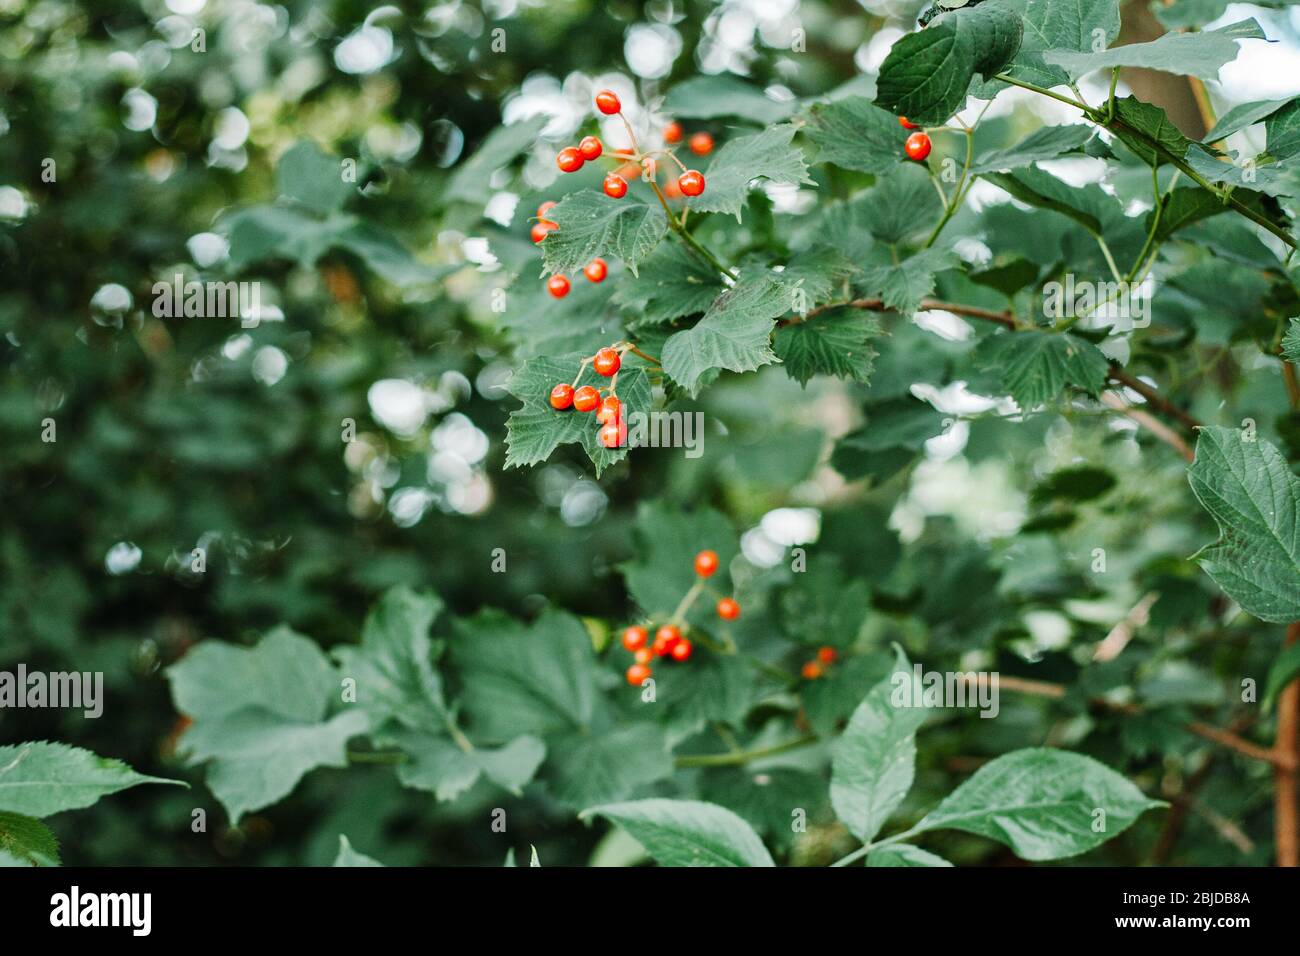 Red squashberry fruits hanging from the green bush in spring Stock Photo